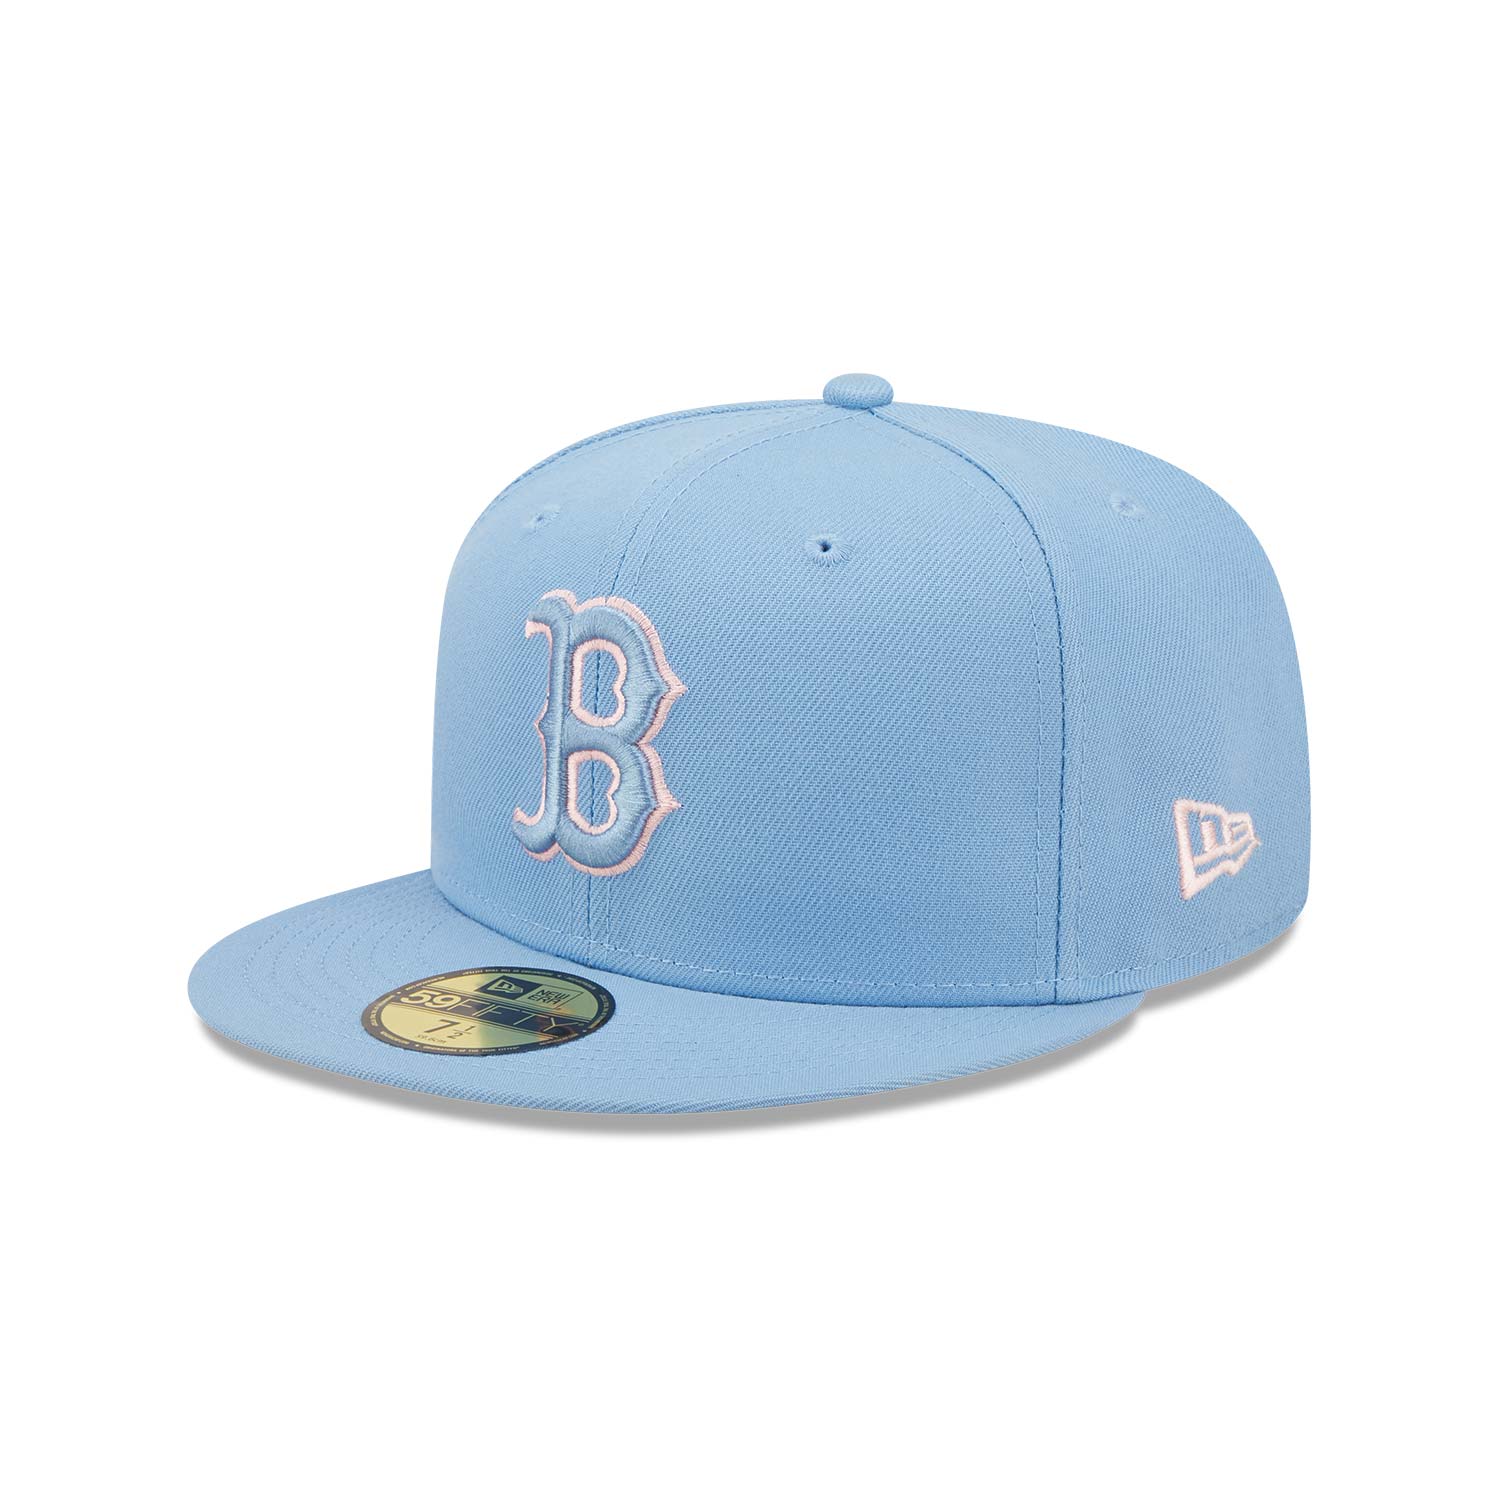 Official New Era Boston Red Sox Pastel Blue 59FIFTY Fitted Cap B8547 ...